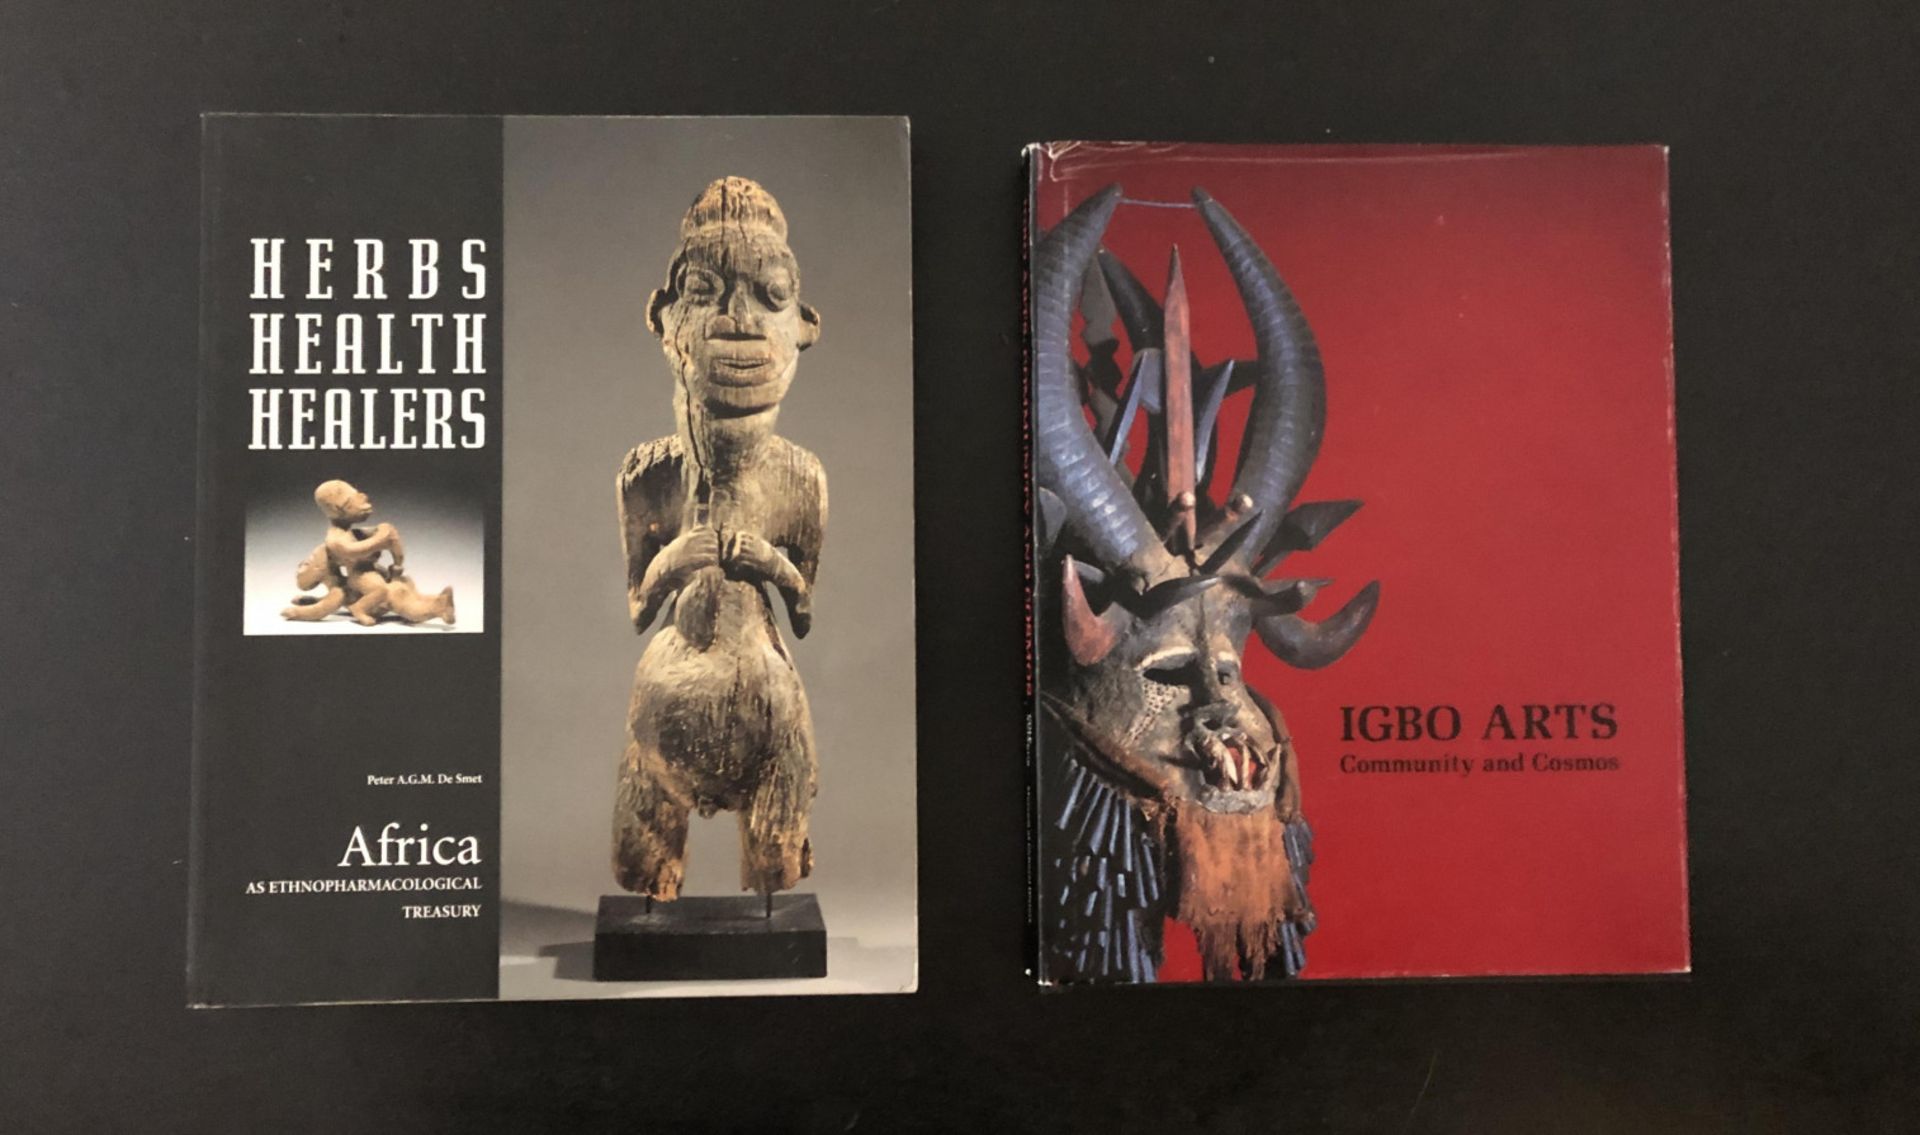 Igbo Arts Community and Cosmos,Herbert M. Cole and Chike C. Aniakor, Museum of Cultural History, Un